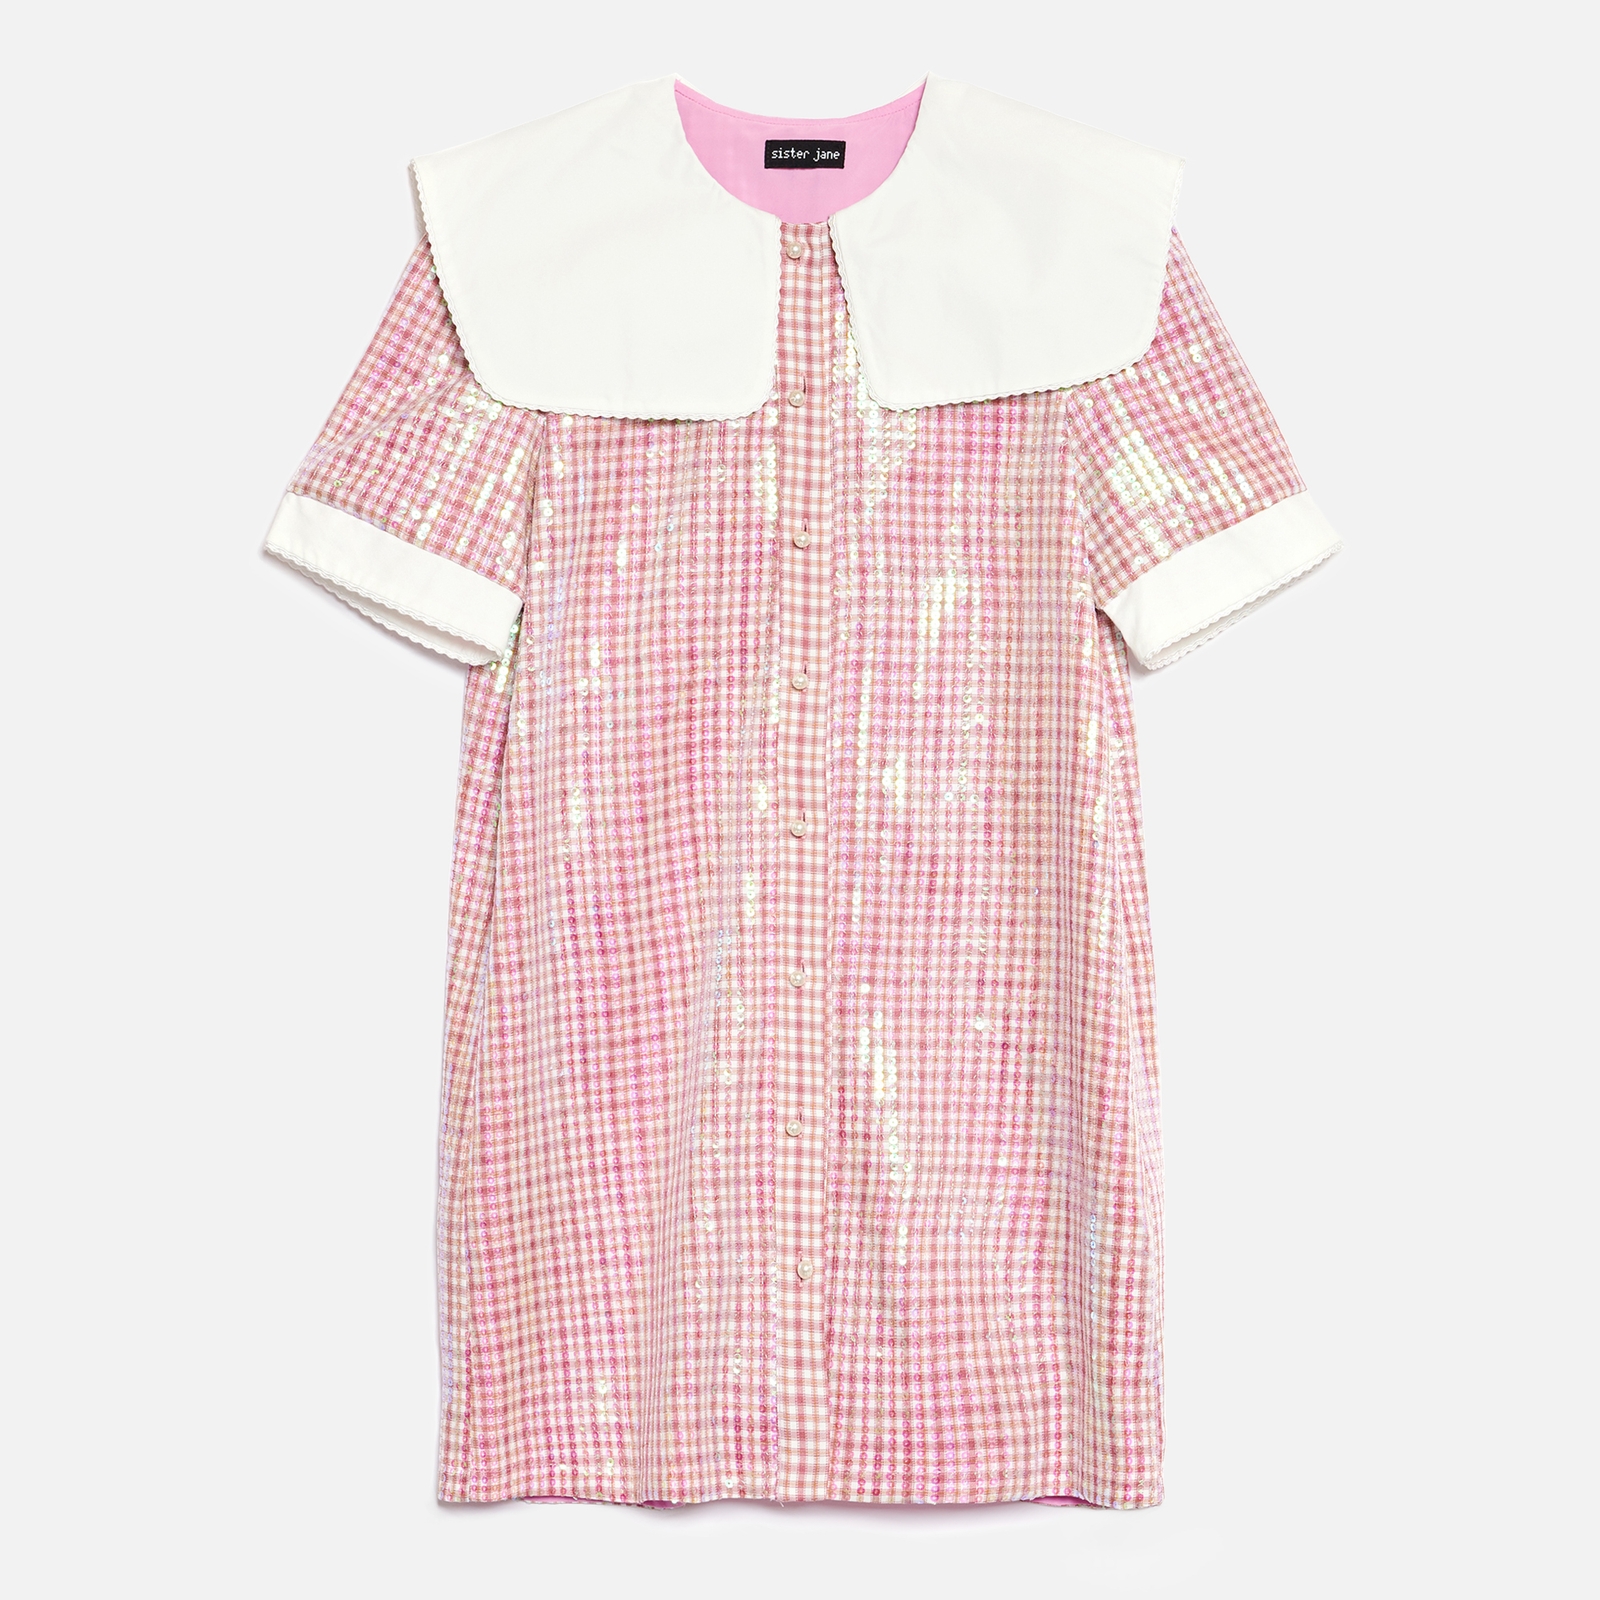 Sister Jane Toffee Sequin Checked Mini Dress